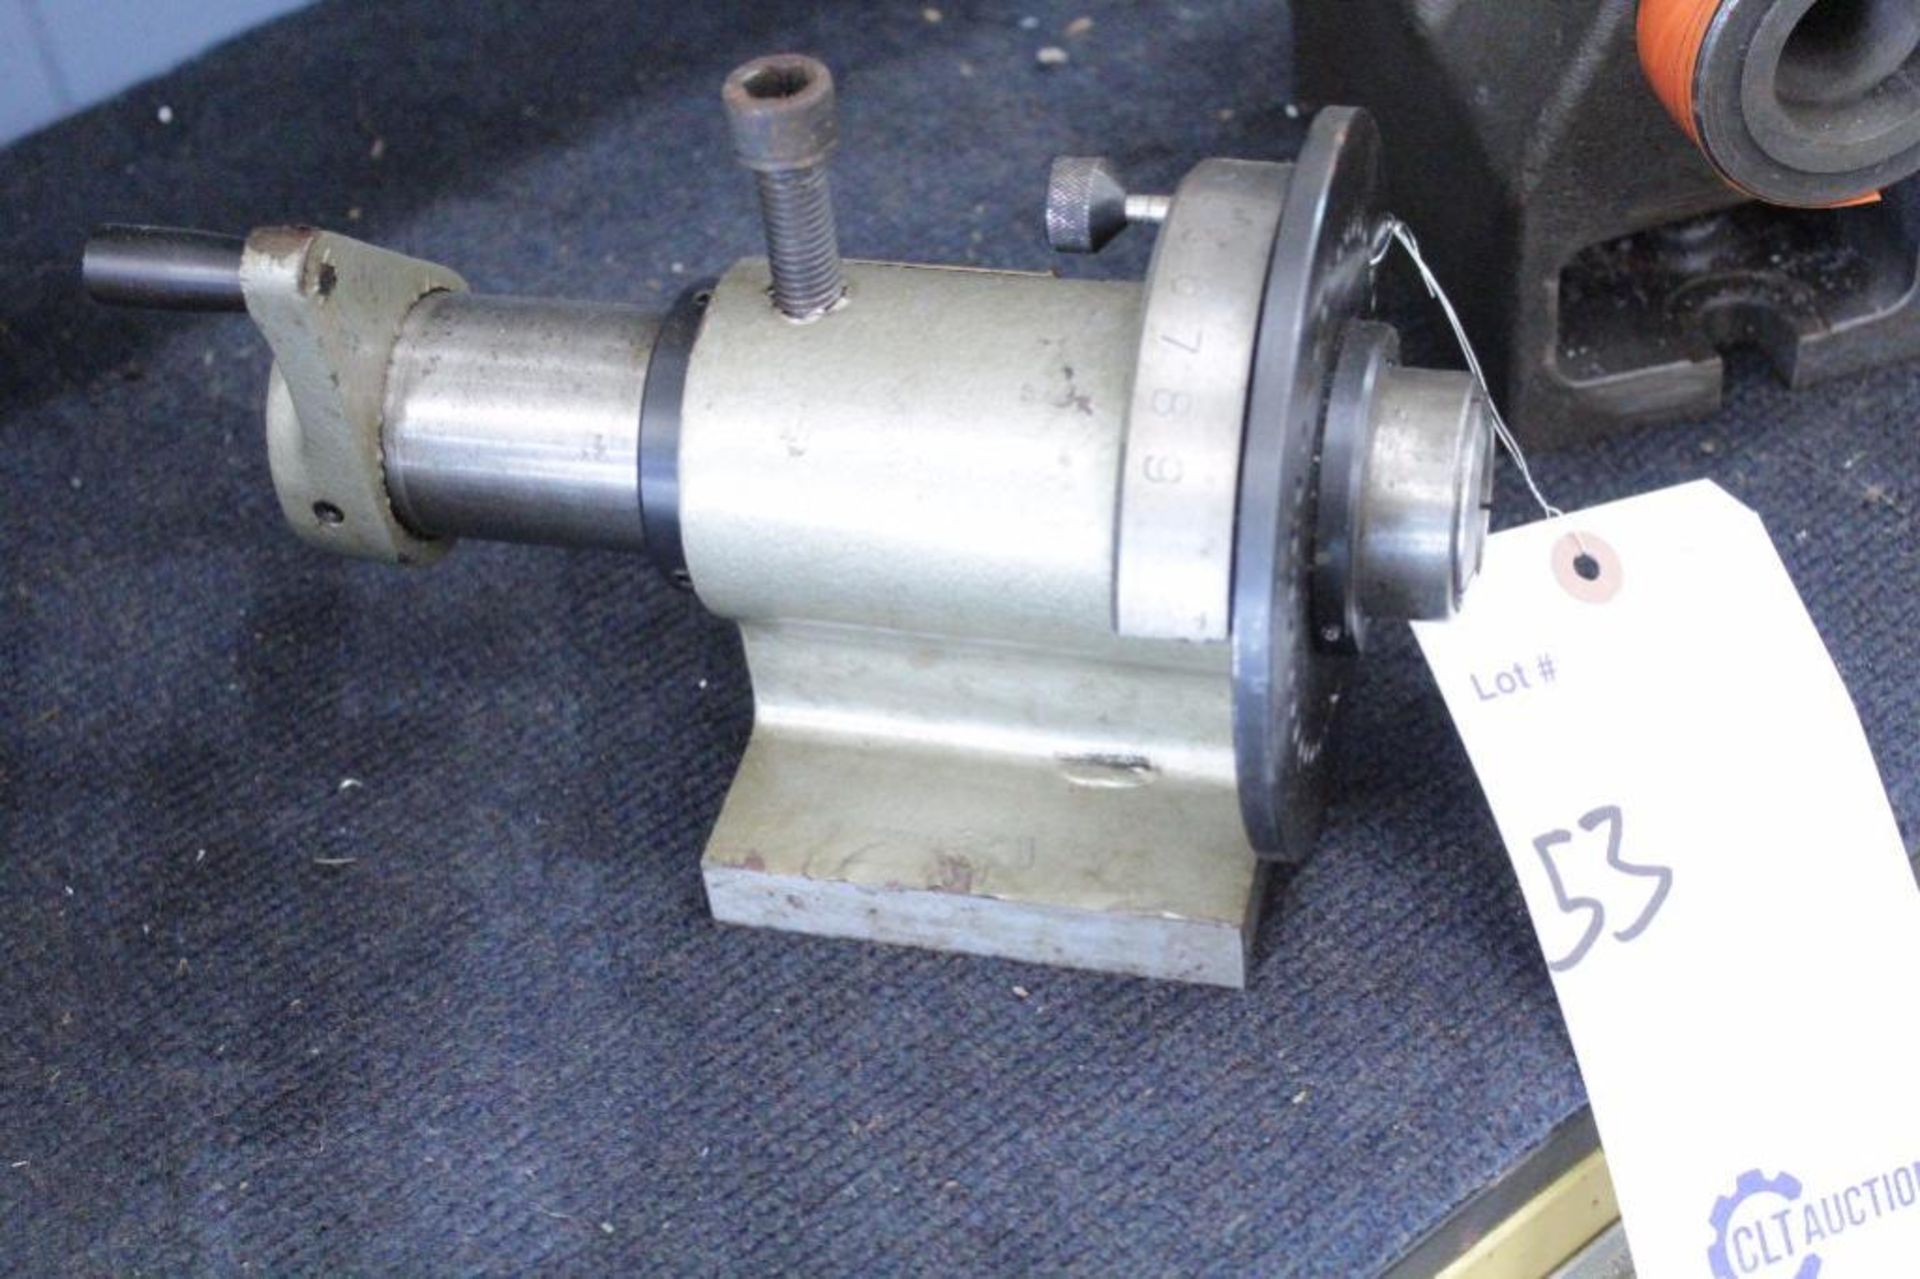 Phase II 225-204 5c collet indexer